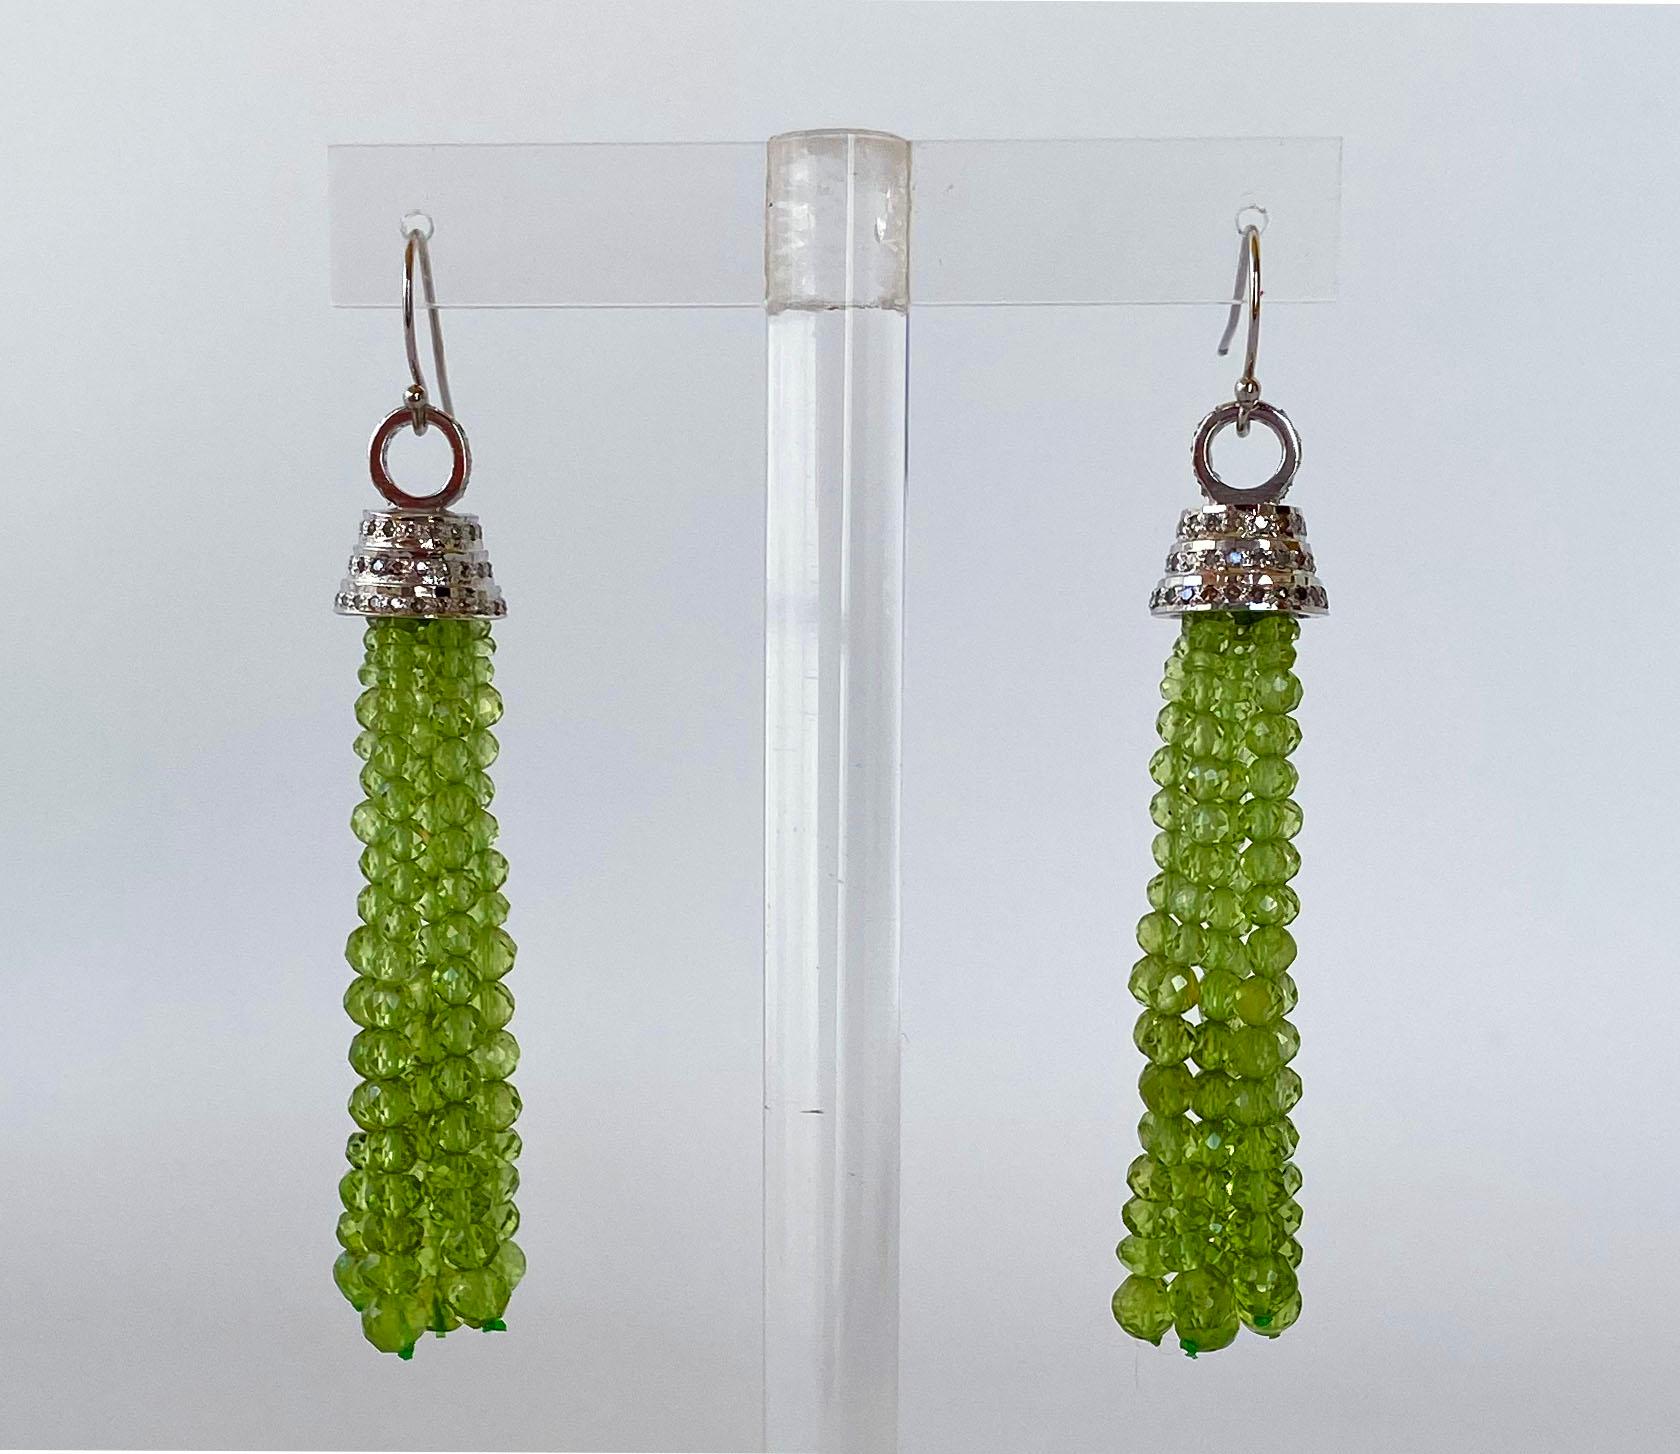 These beautifully crafted and slightly graduated Peridot tassel earrings are made of faceted 1.5mm - 2mm beads. The tassel hangs from a Silver Rhodium plated Cup with encrusted diamonds, offering a light and luxurious feel. Ear wires are made of 14k